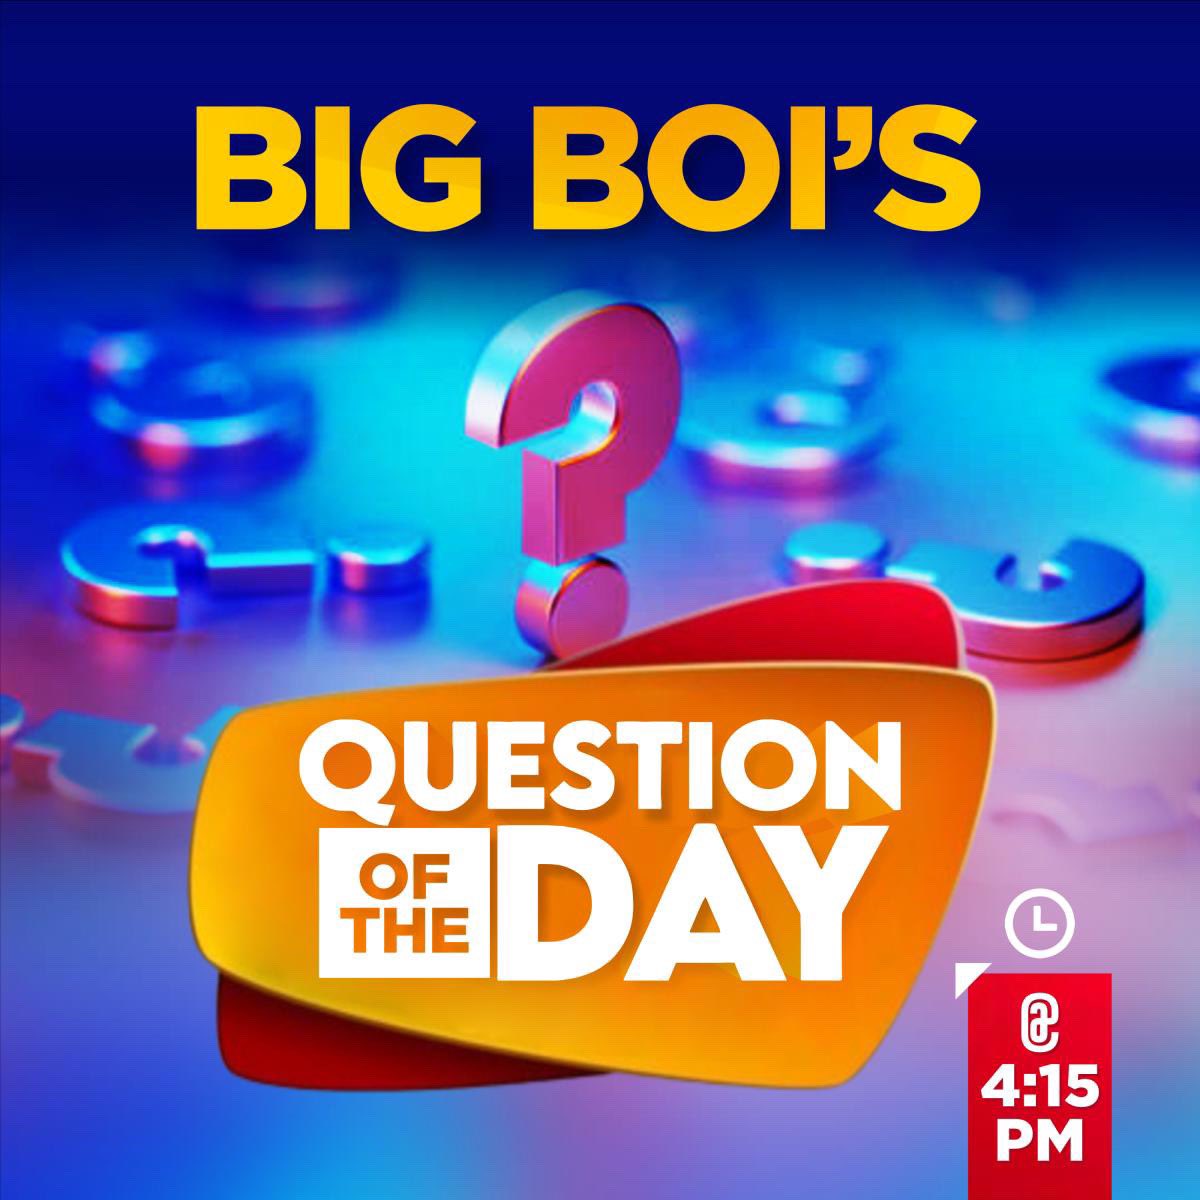 Big Boi’s question of the day! Do you floss after you brush? @THEBEAT993